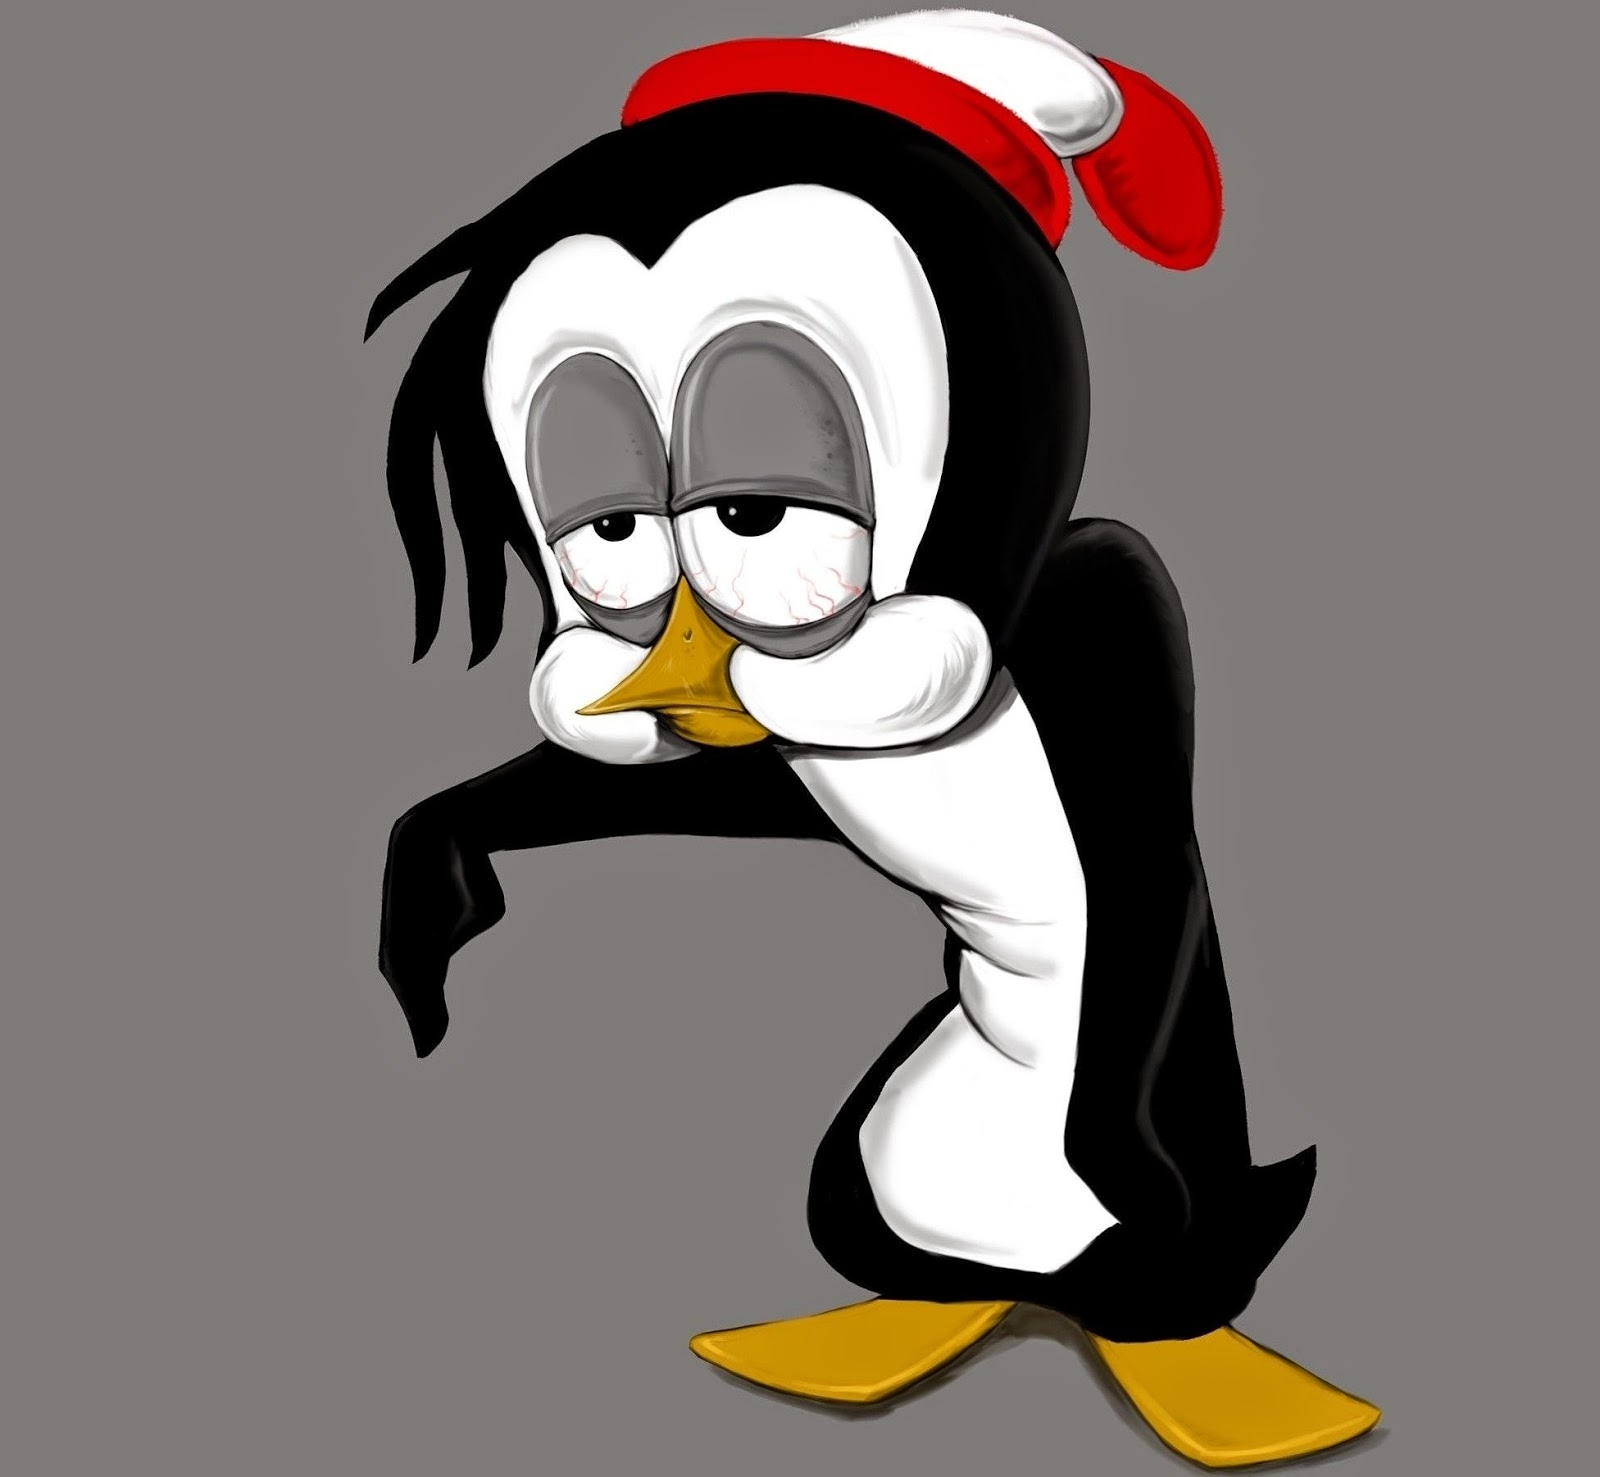 Chilly Disney Hd Wallpapers Chilly Willy Hd Wallpapers.